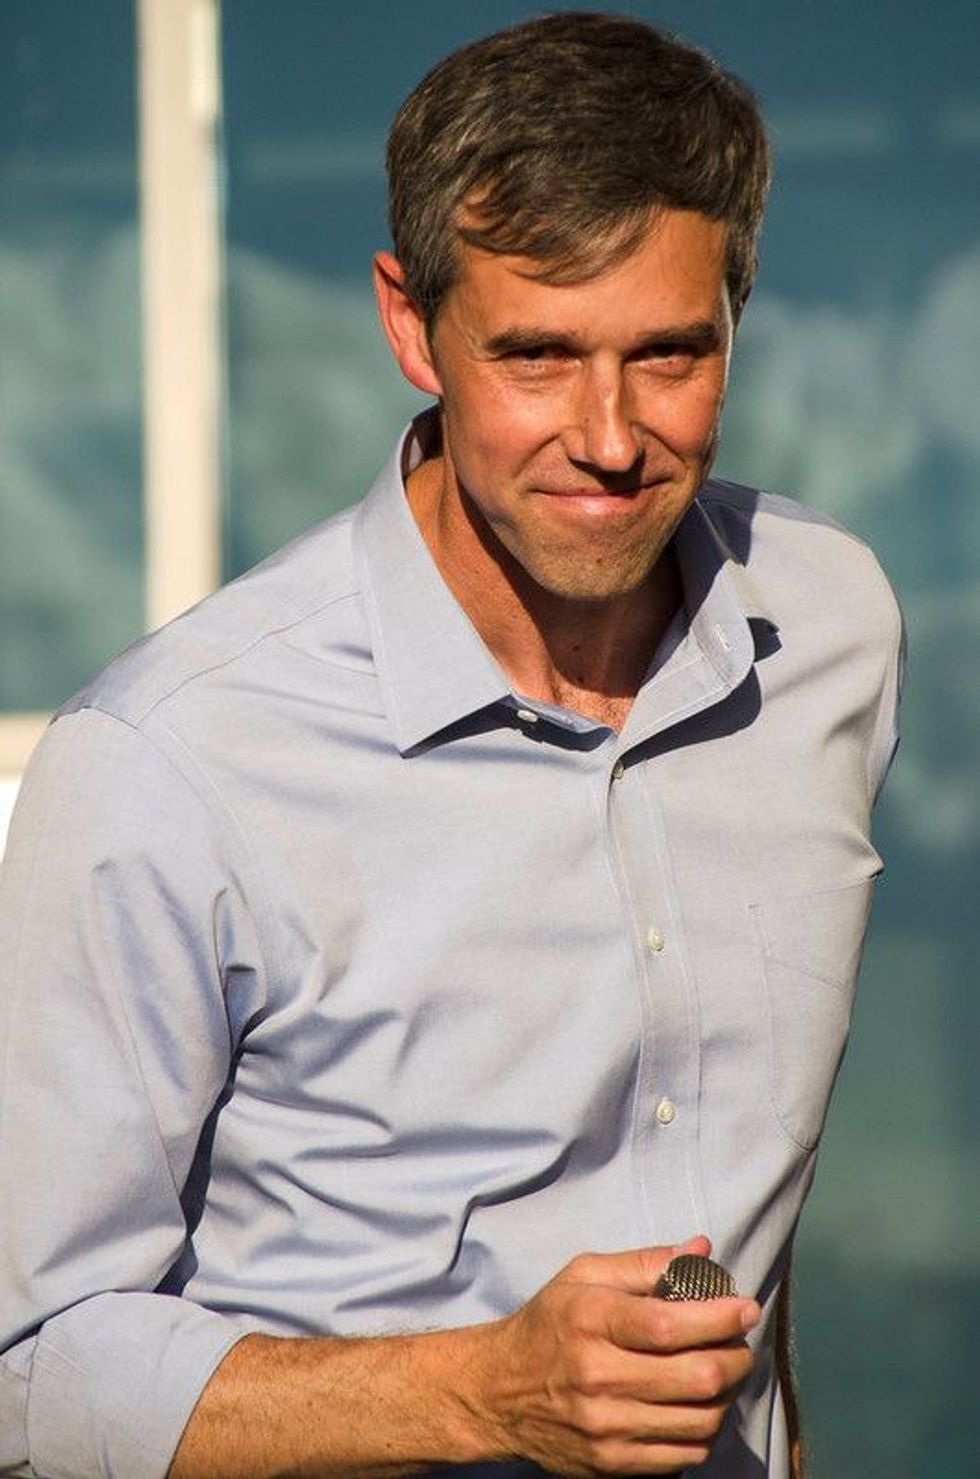 Beto O'Rourke attended Rivera Elementary School and Woodberry Forest School.